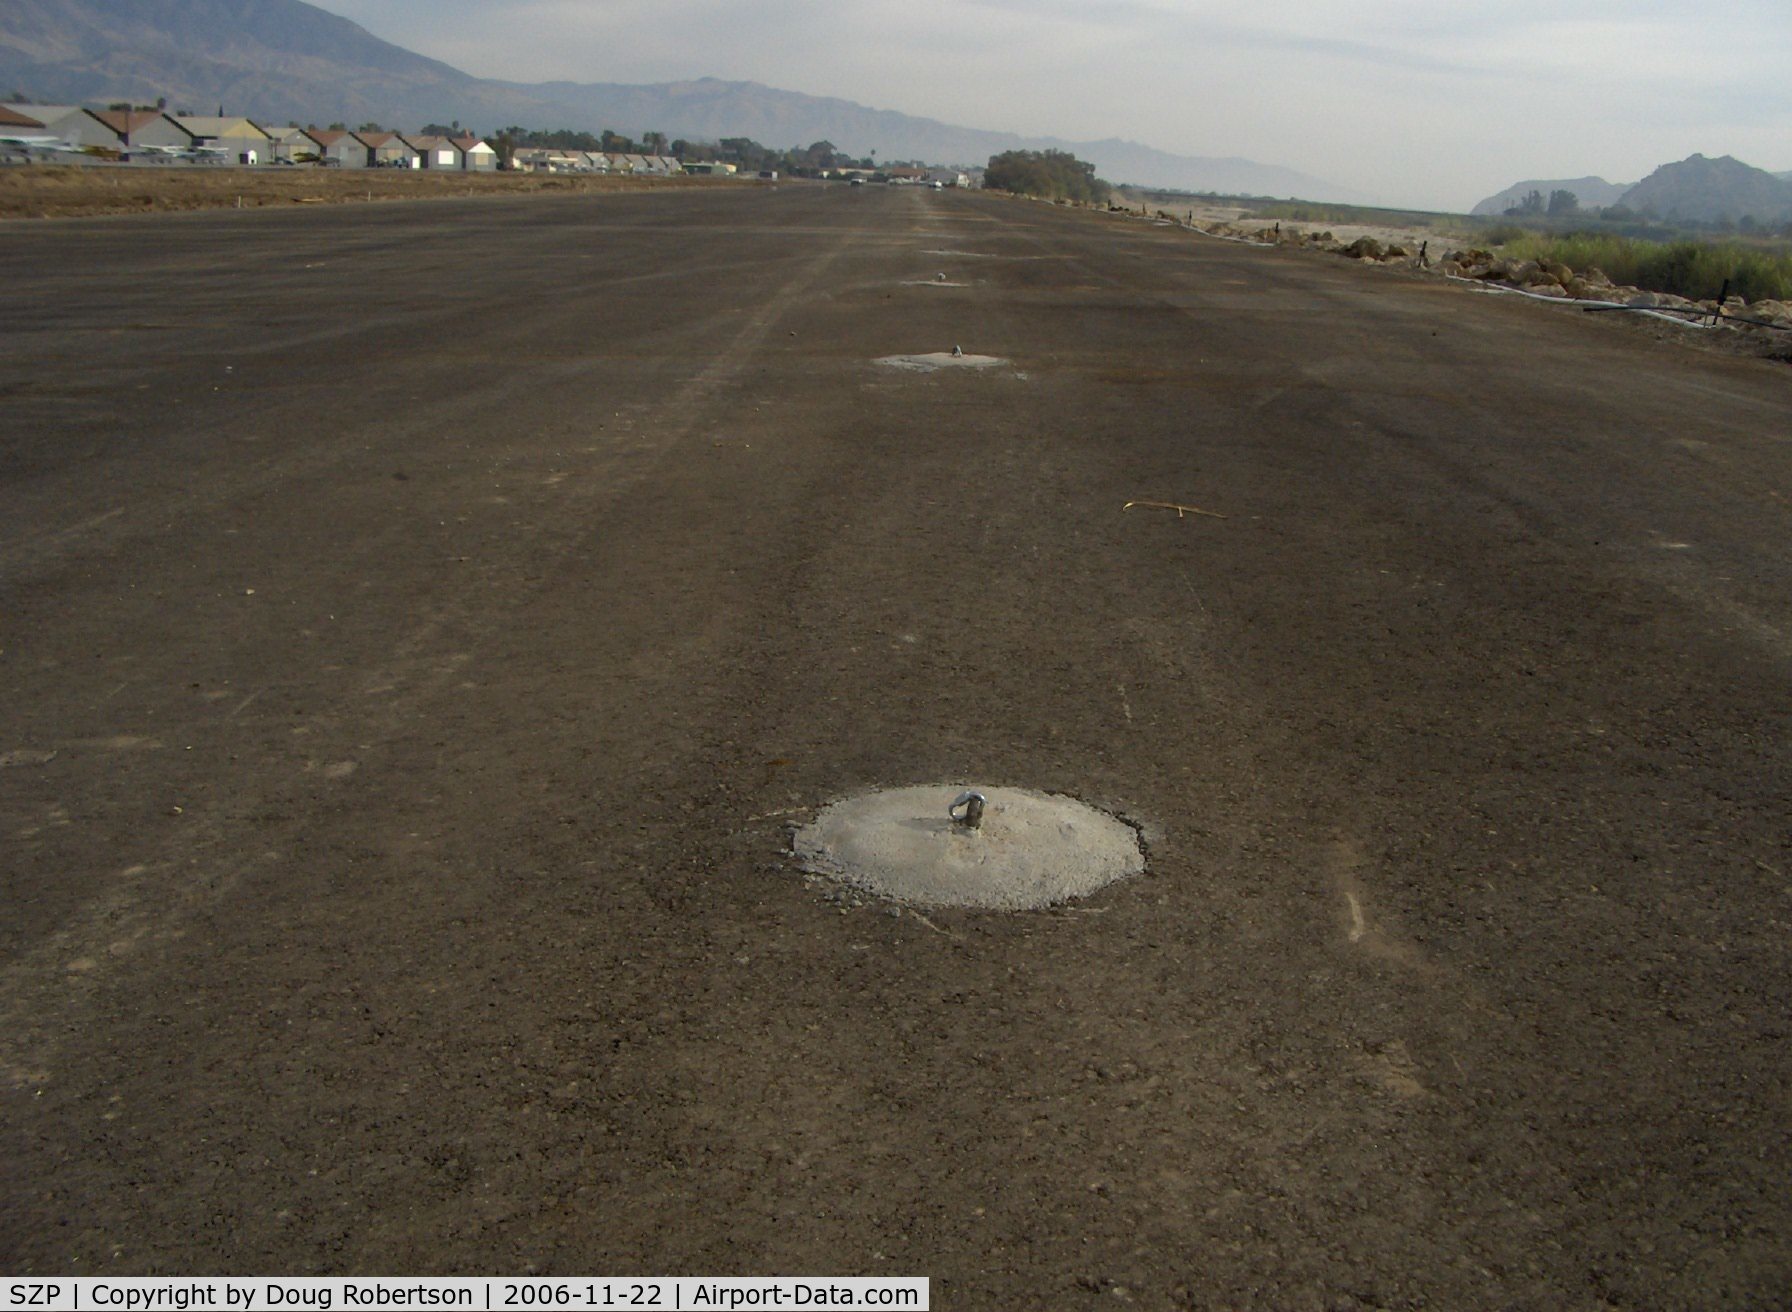 Santa Paula Airport (SZP) - New transient parking tiedown pads anchored in concrete